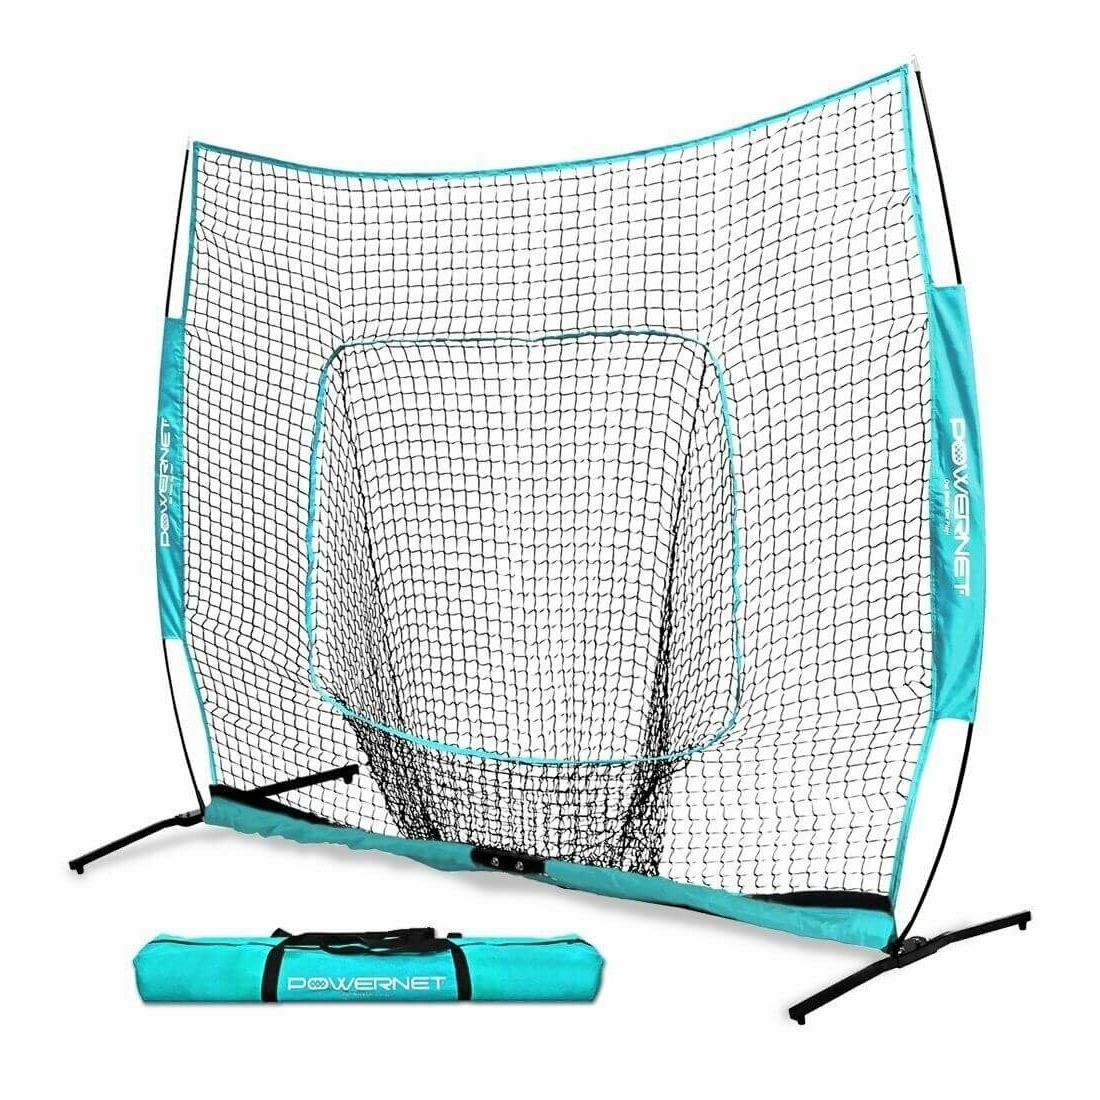 PowerNet 7x7 PRO Portable Pitching Batting Net With One Piece Frame And Carry Bag - Black